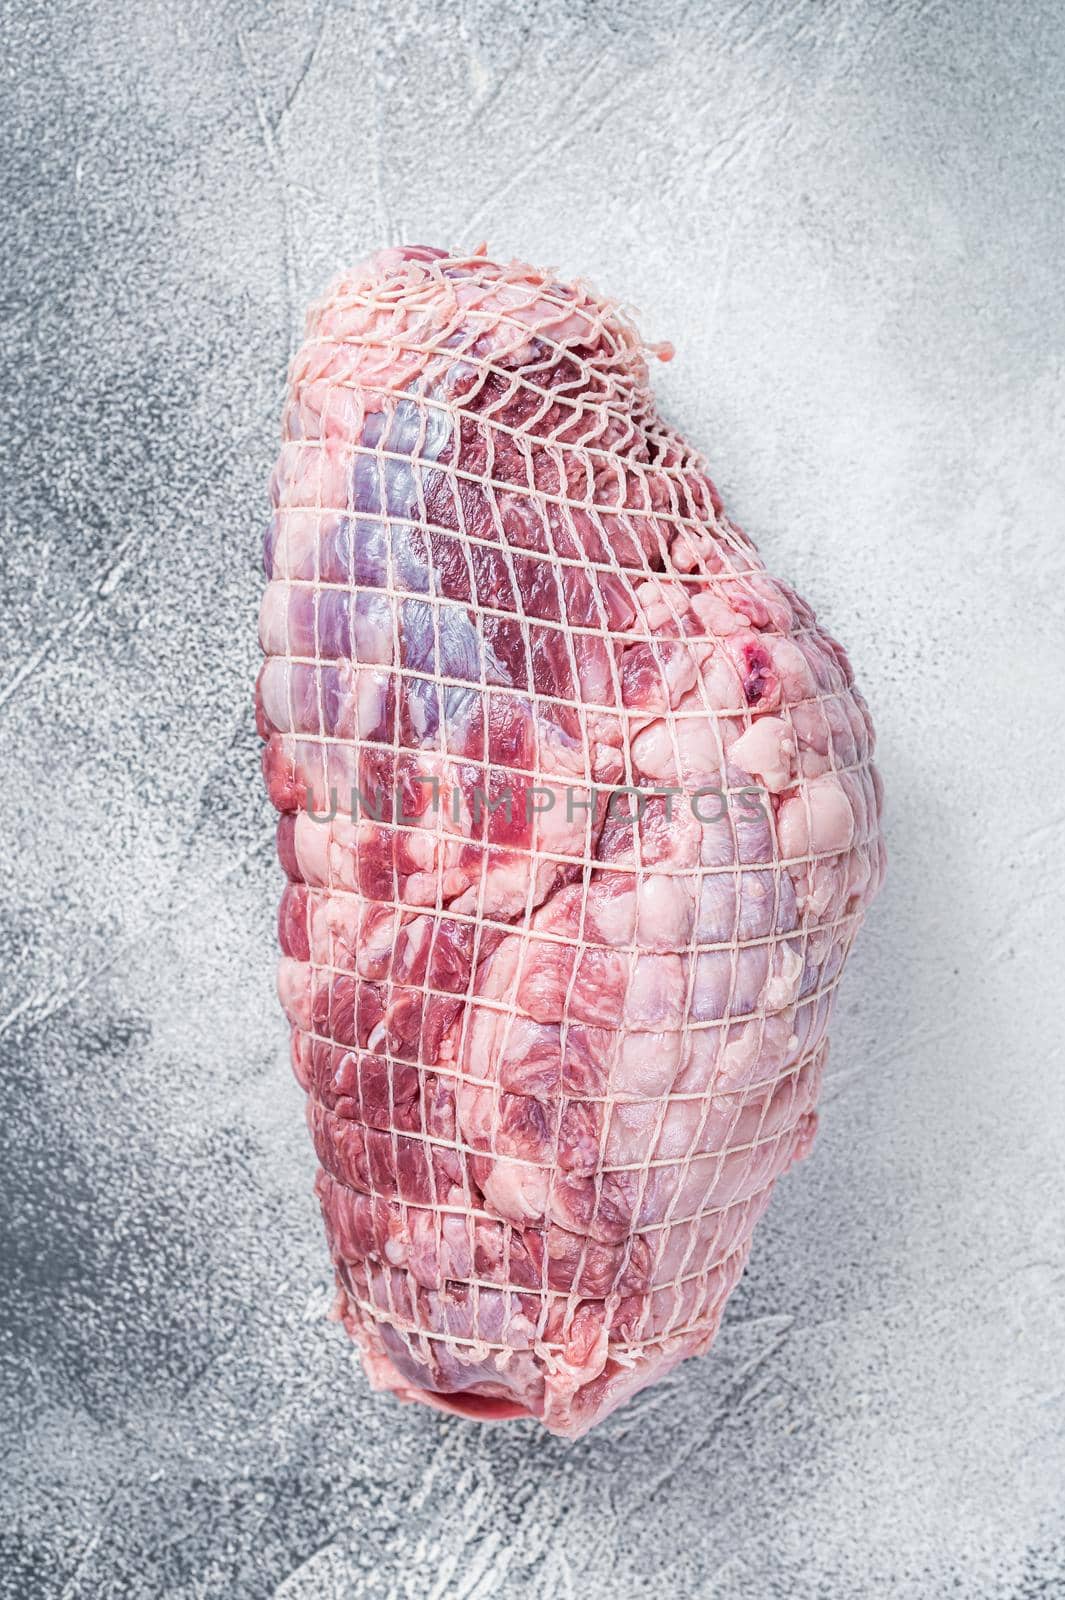 Boneless Leg of Lamb meat on butcher table. White background. Top view by Composter